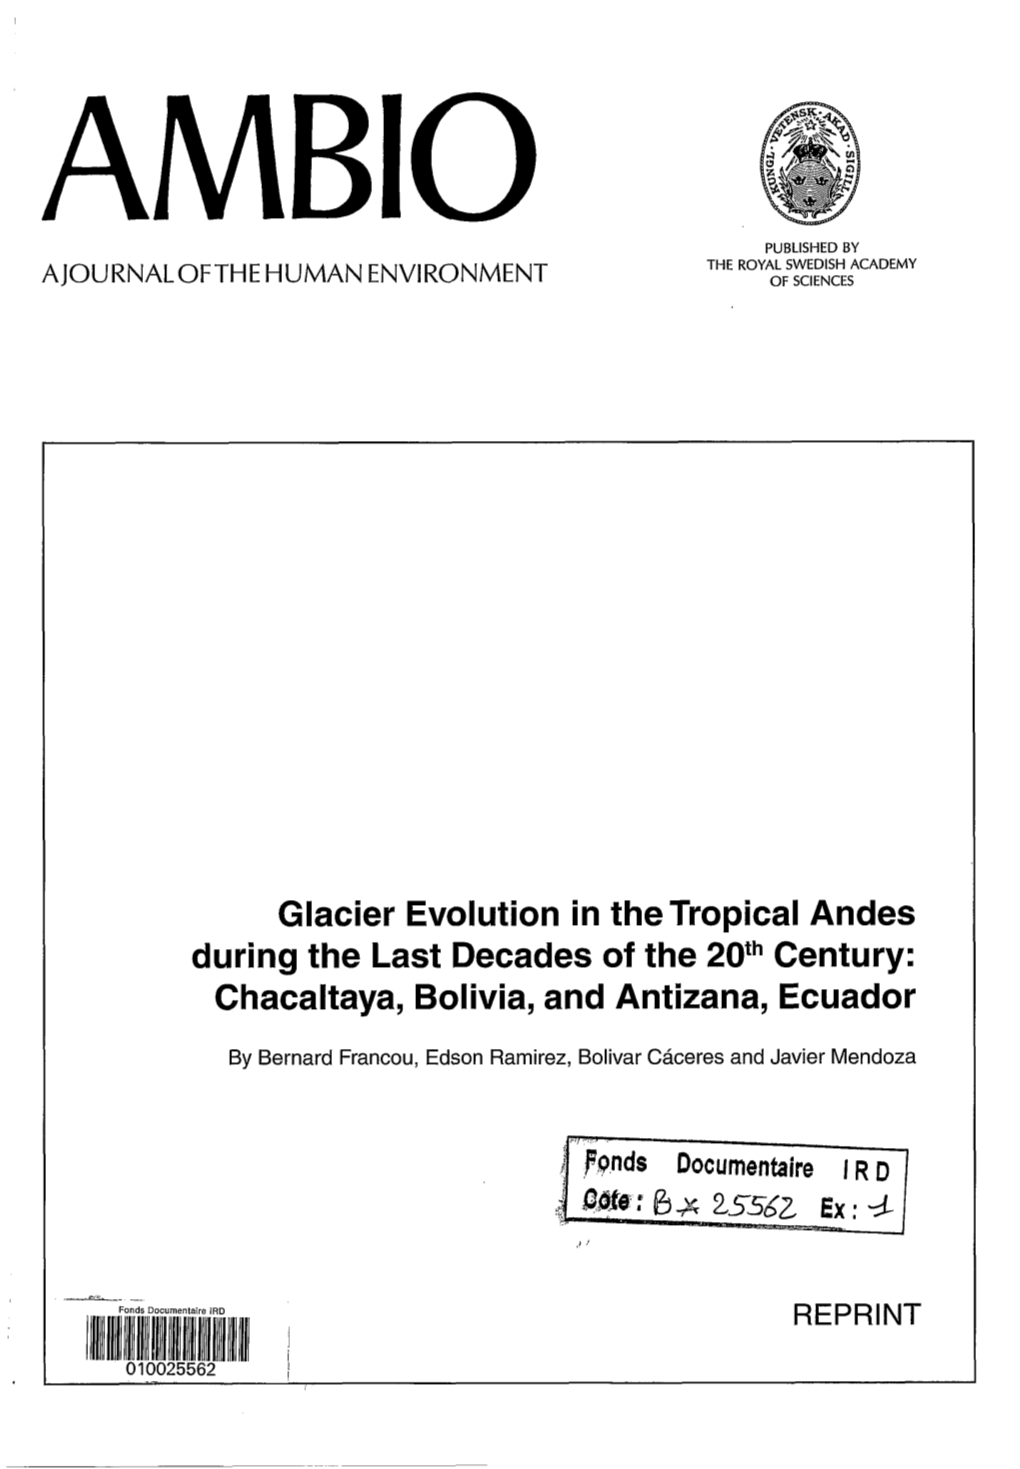 Glacier Evolution in the Tropical Andes During the Last Decades of the 20Th Century : Chacaltaya, Bolivia, and Antizana, Ecuador